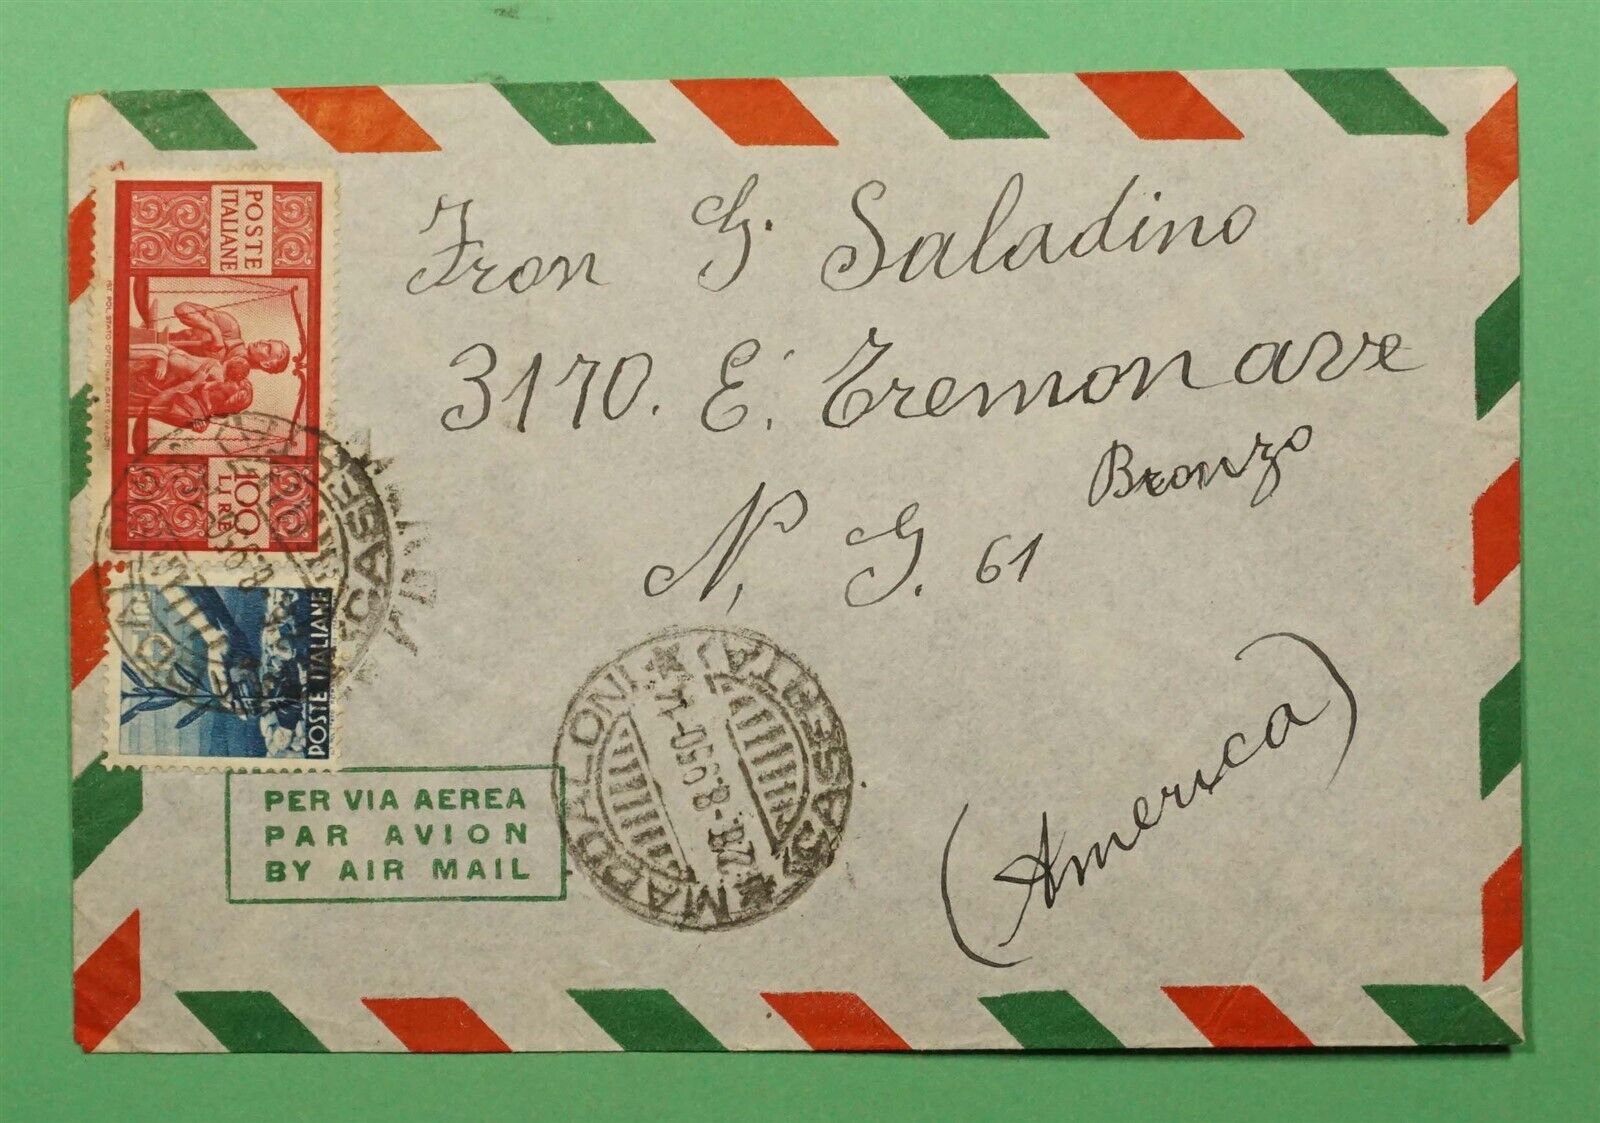 DR WHO 1950 ITALY MADDALONI AIRMAIL TO USA C329200